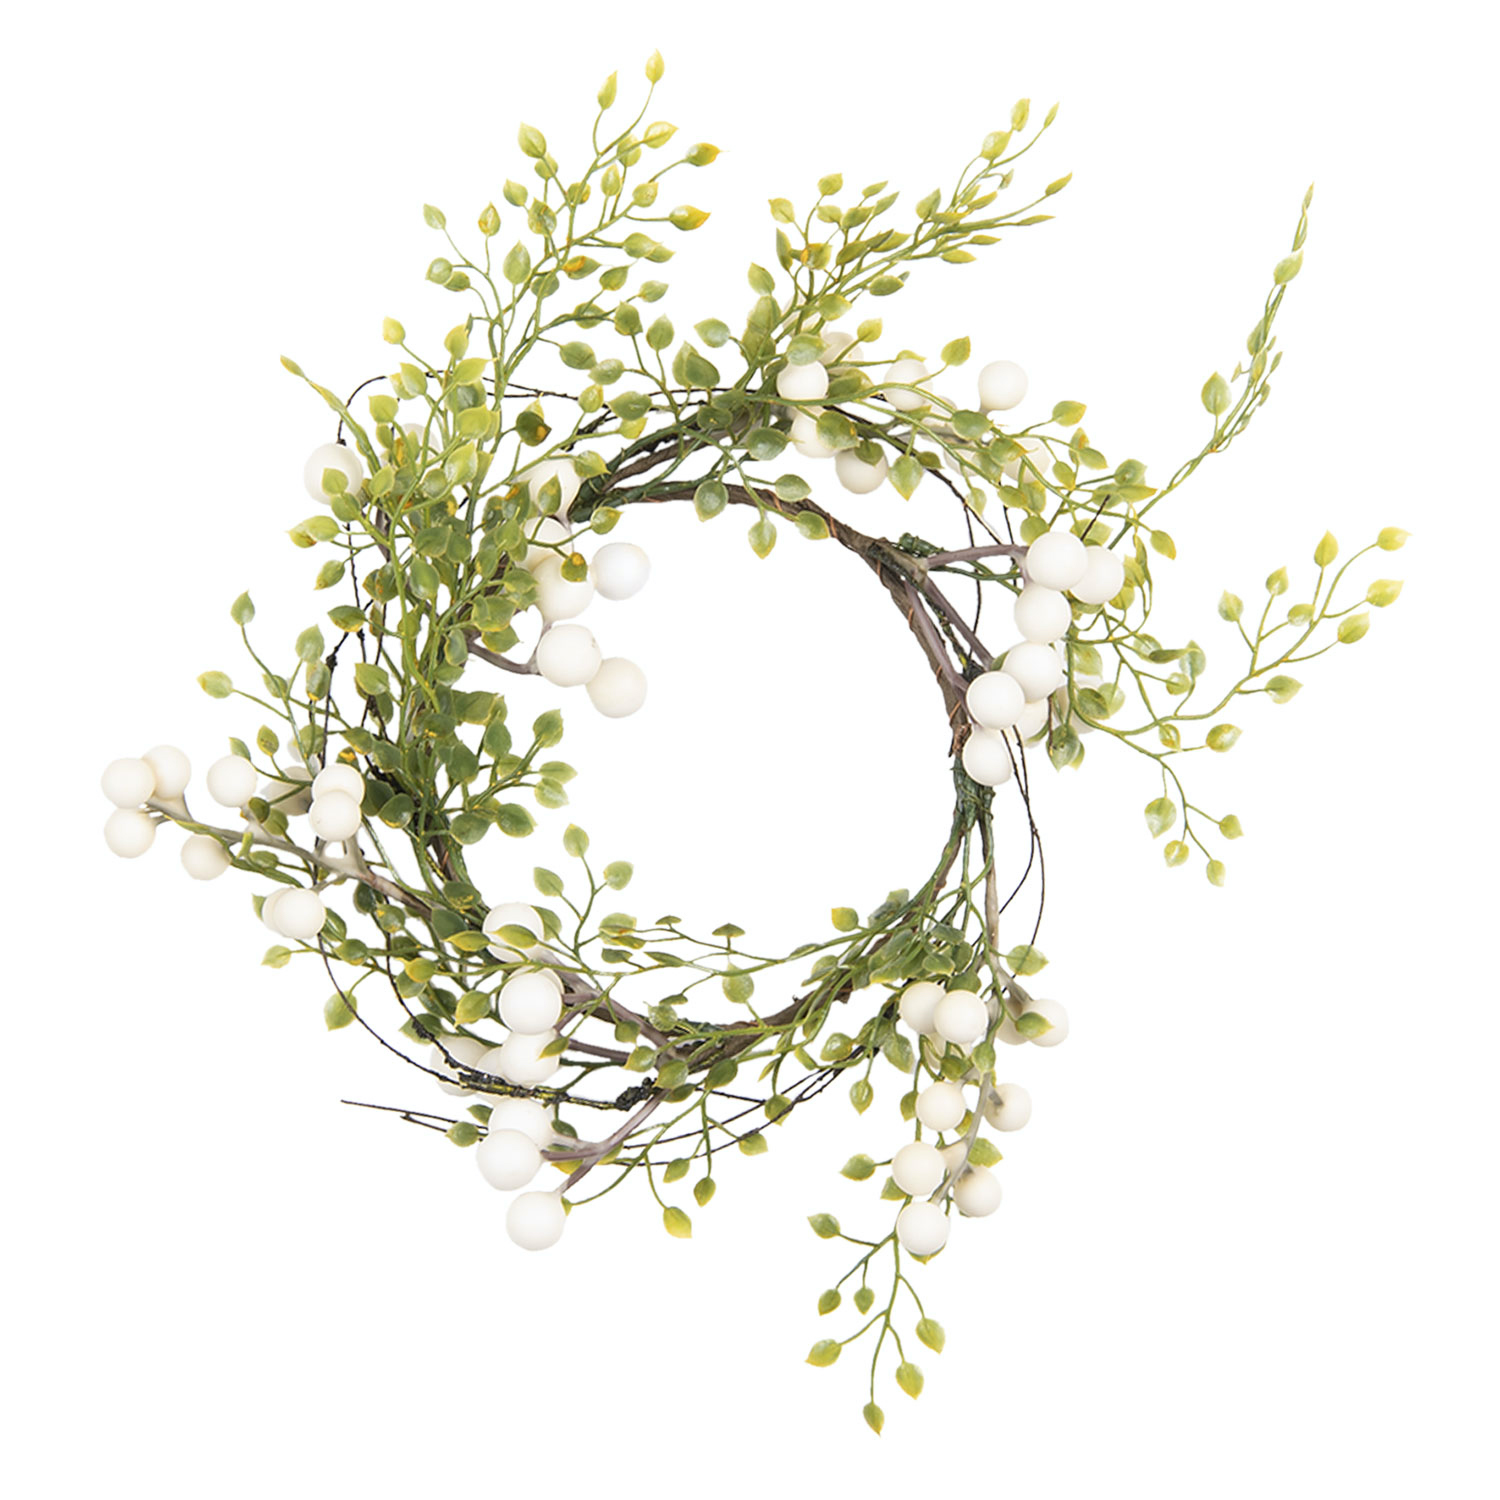 White Berries Wreath for a traditional New England look to your room from The White Lighthouse Furniture for the hallway, living room, bedroom and bathroom. New England coastal, country and farmhouse interiors